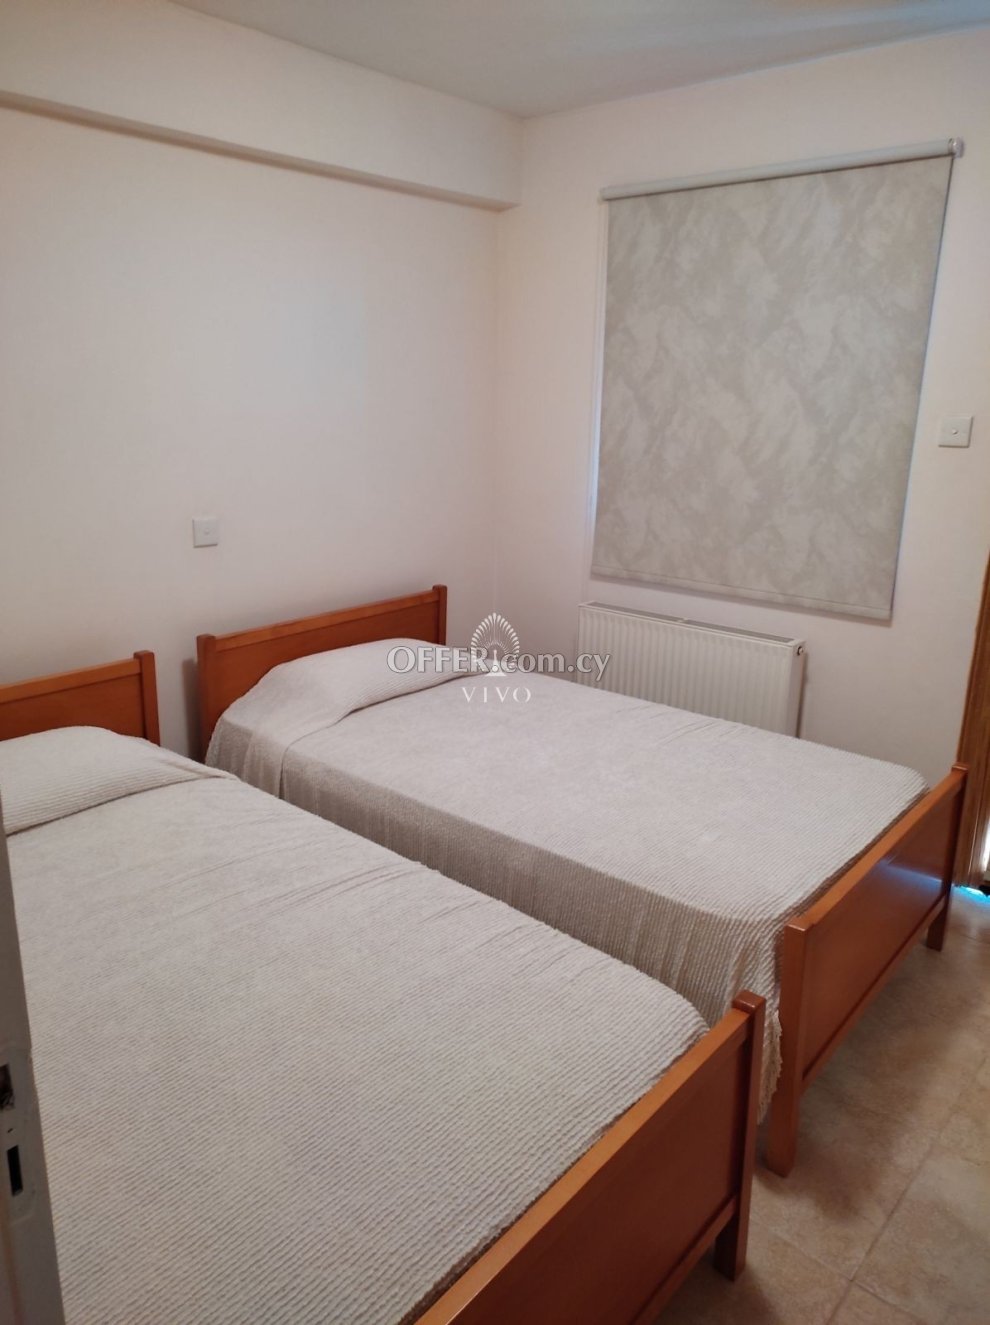 FOUR BEDROOM FULLY FURNISHED HOUSE IN PELENTRI - 2